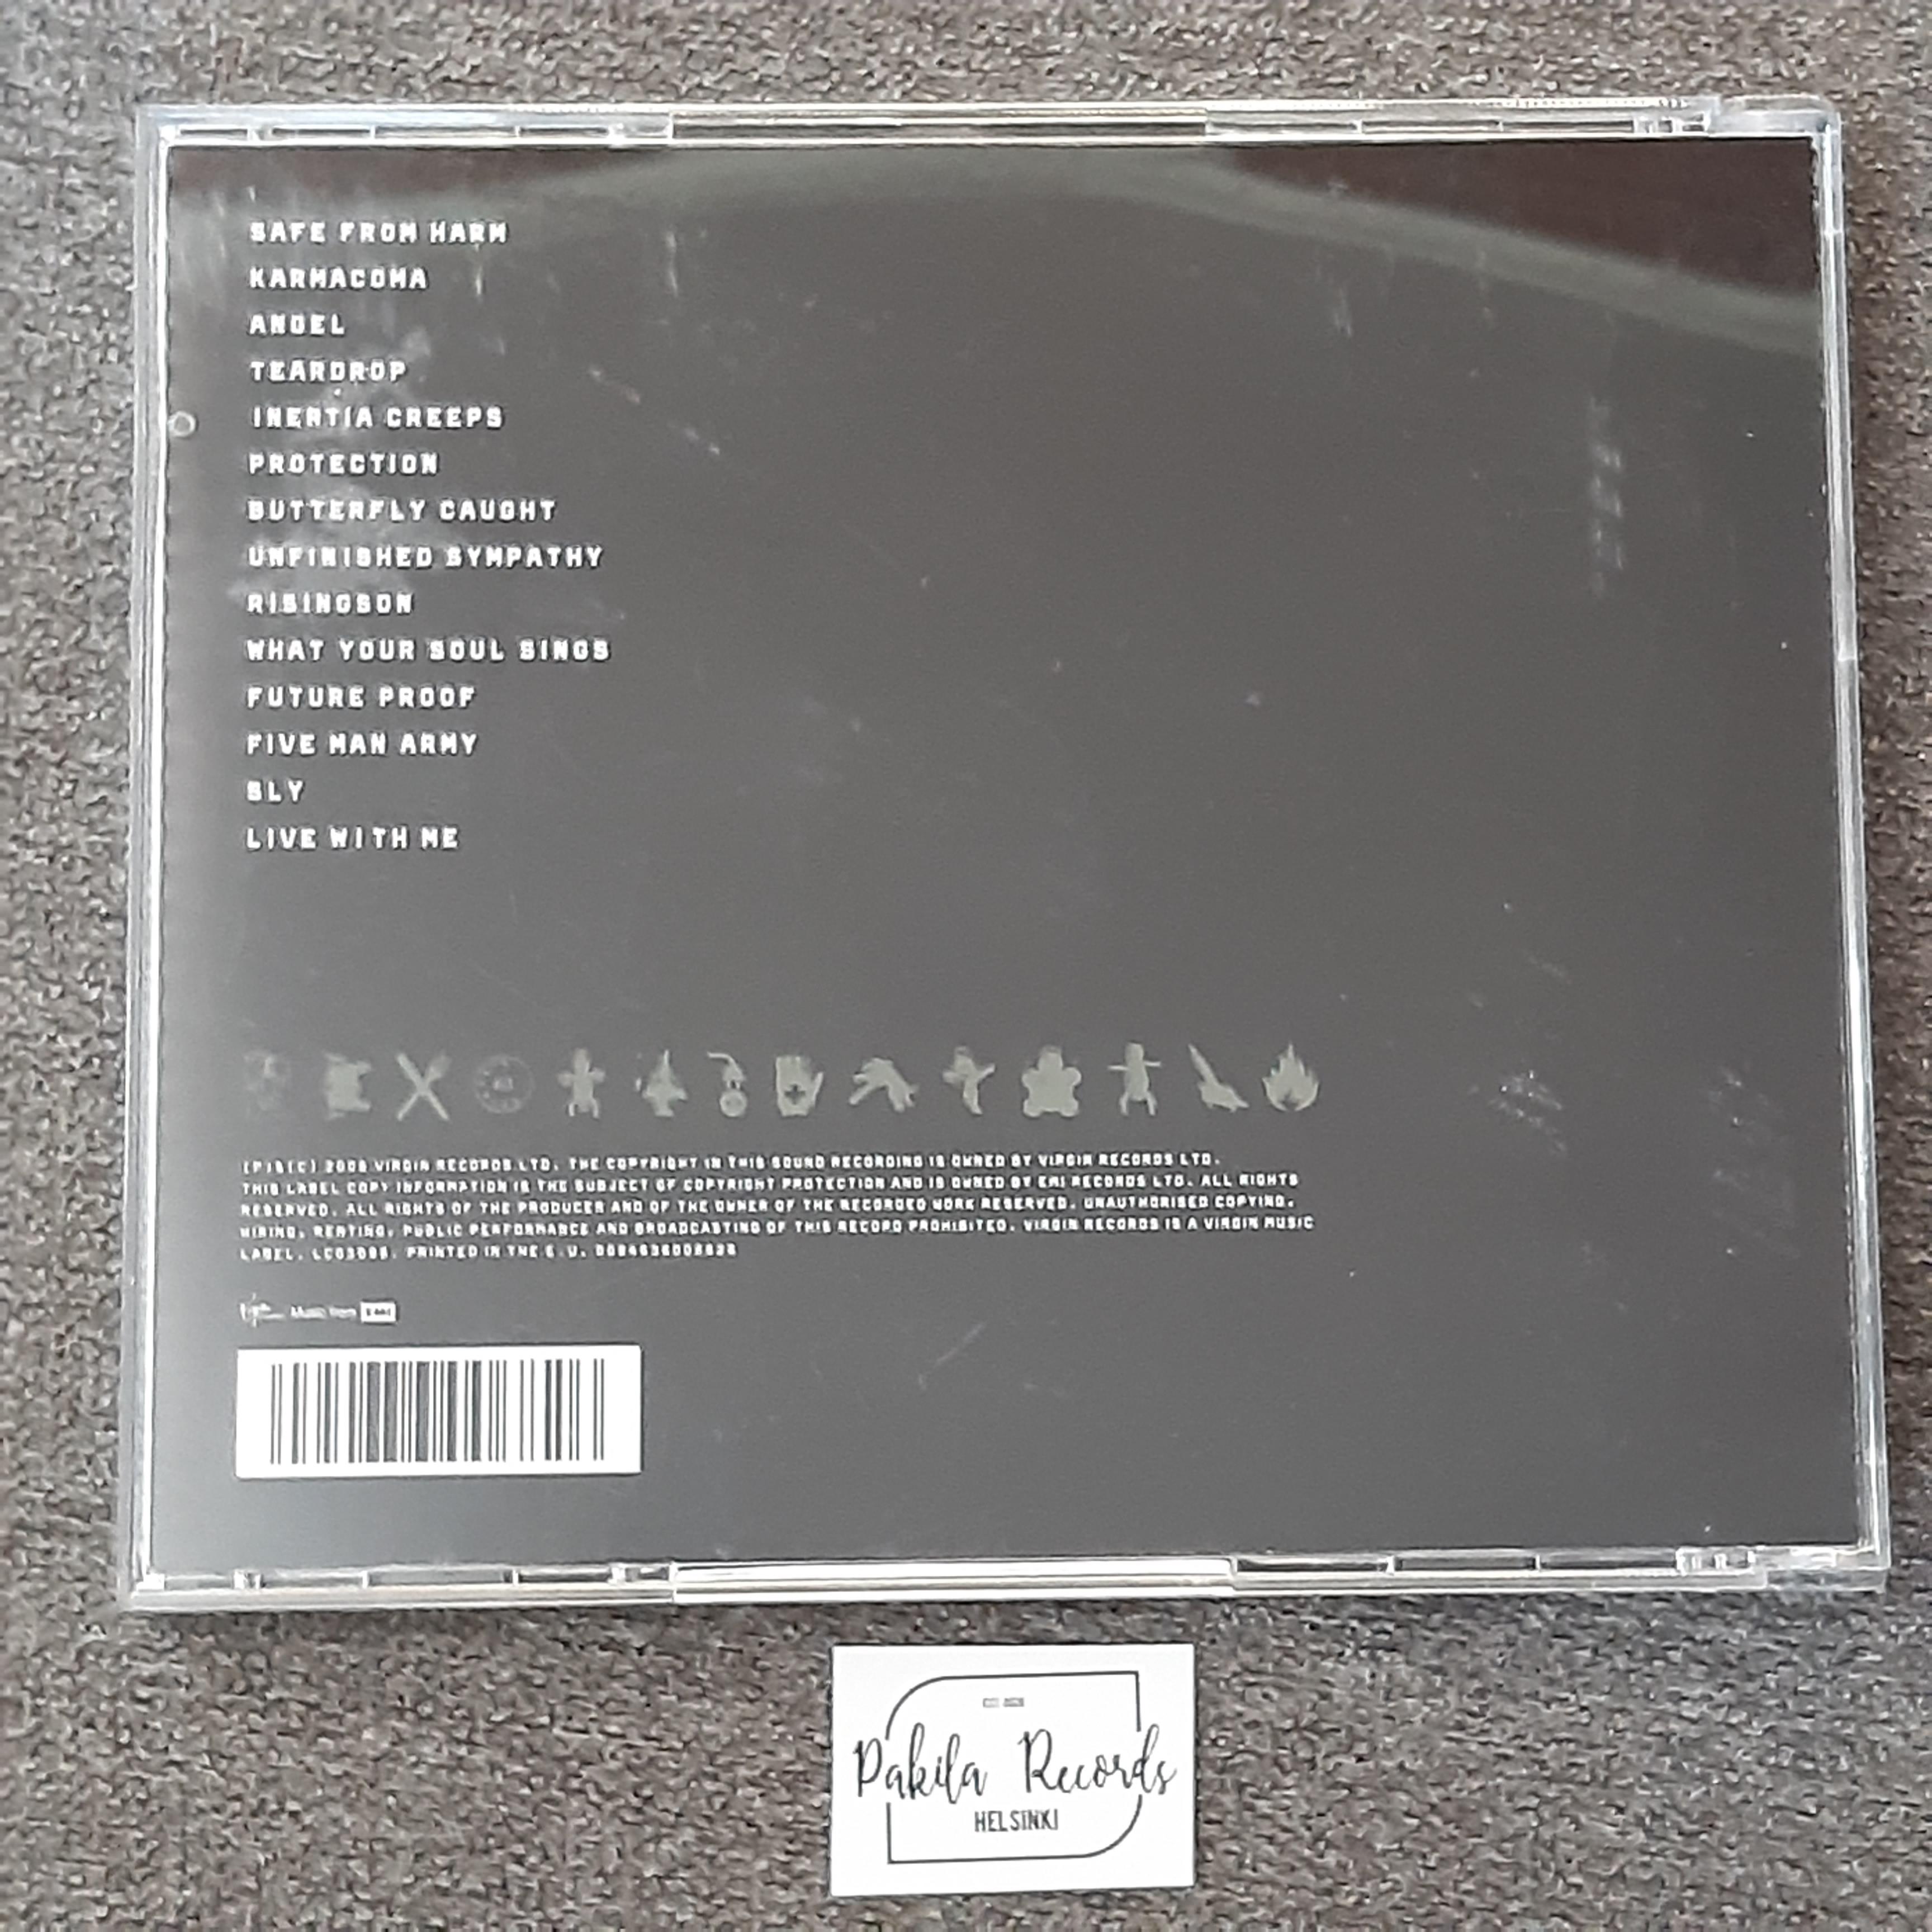 Massive Attack - Collected - CD (käytetty)